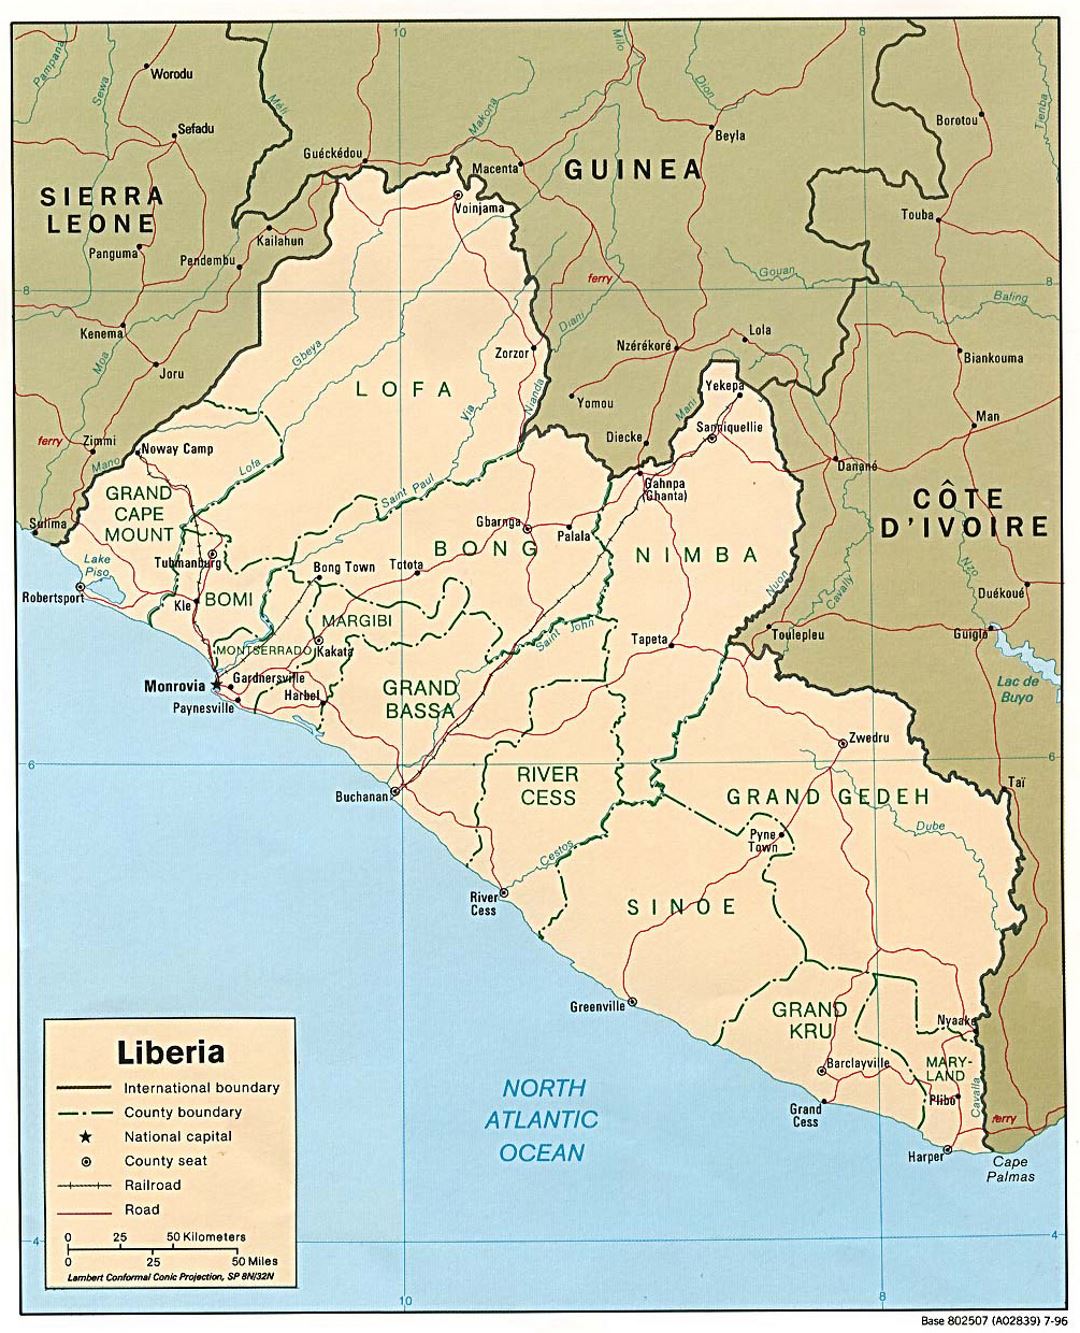 Detailed political and administrative map of Liberia with roads, railroads and major cities - 1996